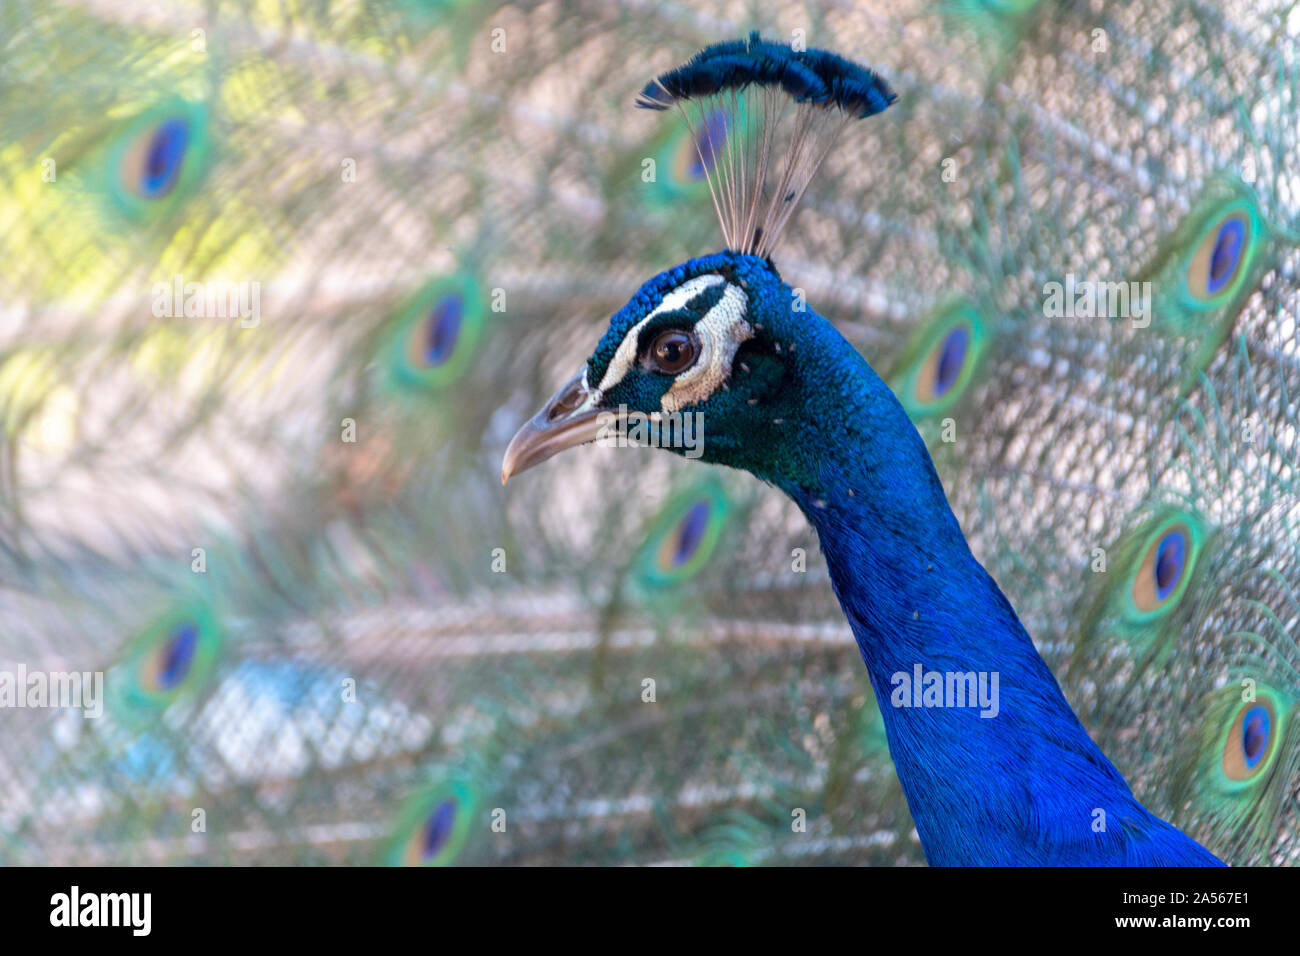 a close up view of a beautiful peacock Stock Photo